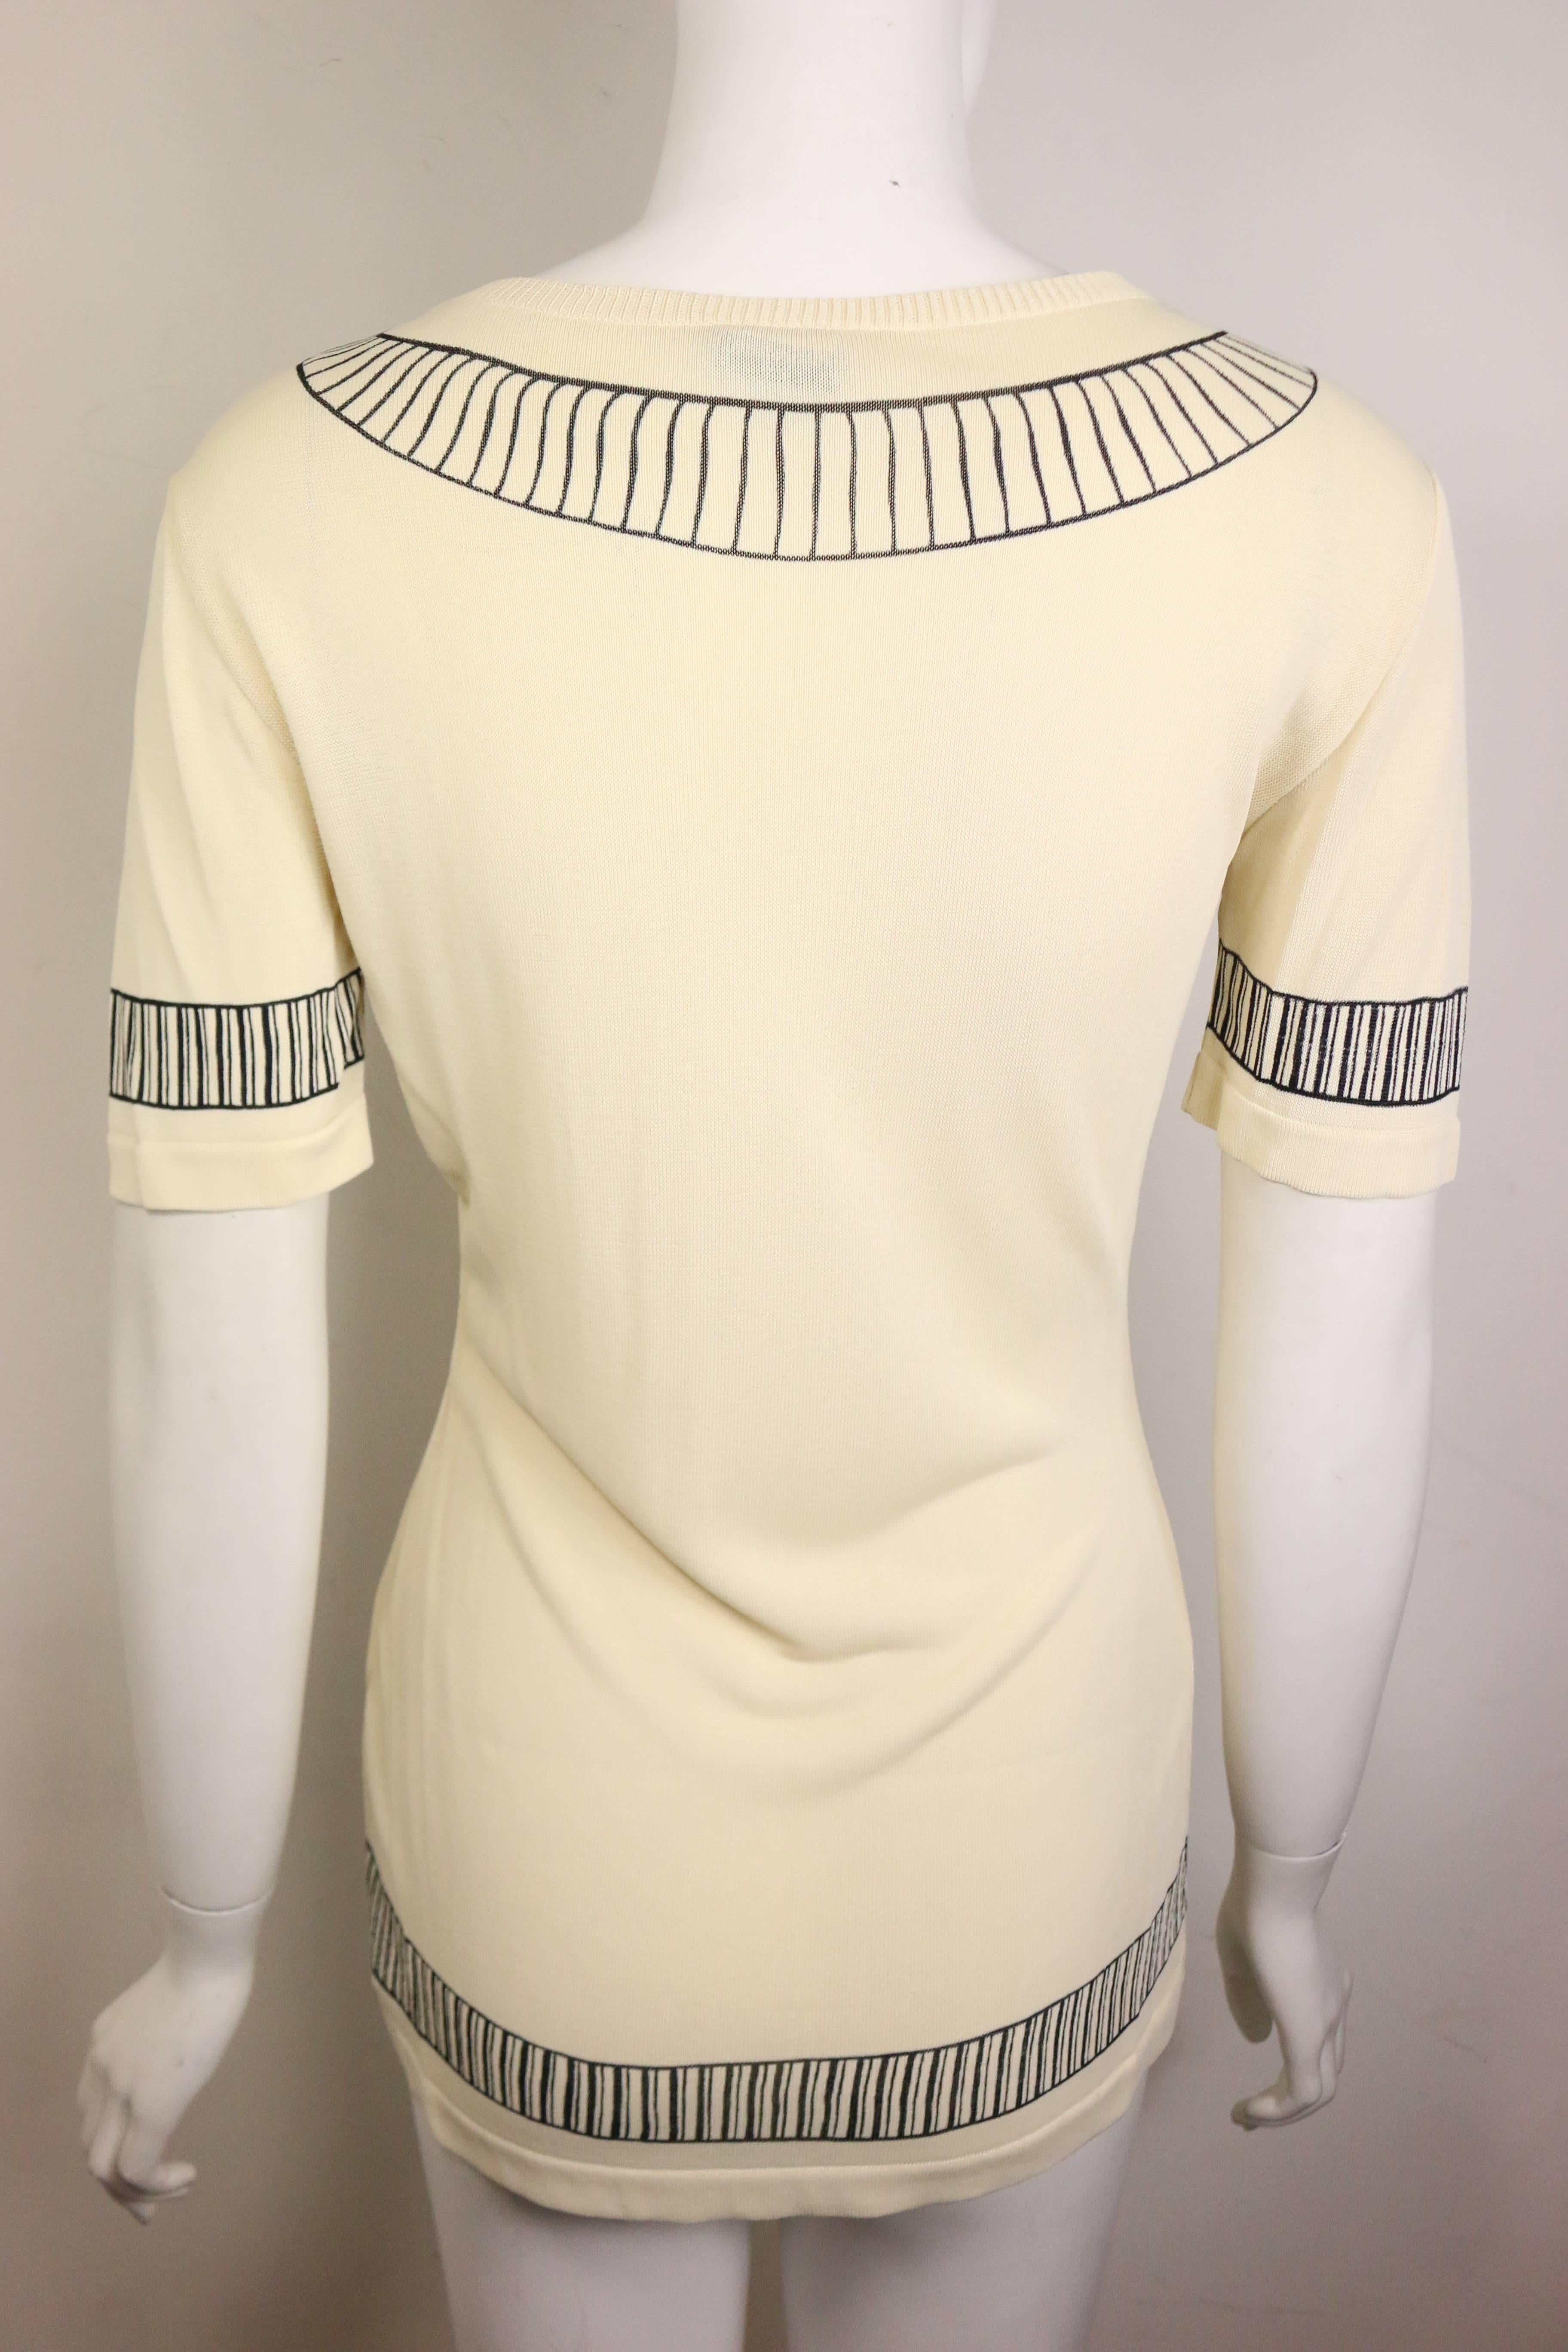 - Vintage 90s Moschino Couture lightweight short sleeves pullover beige top with polo collar shirt printed in black linings. Another fun and creative item from Moschino! 

- Made in Italy. 

- Size IT 40, FR 36 and US 6. 

- 100% Rayon. 

